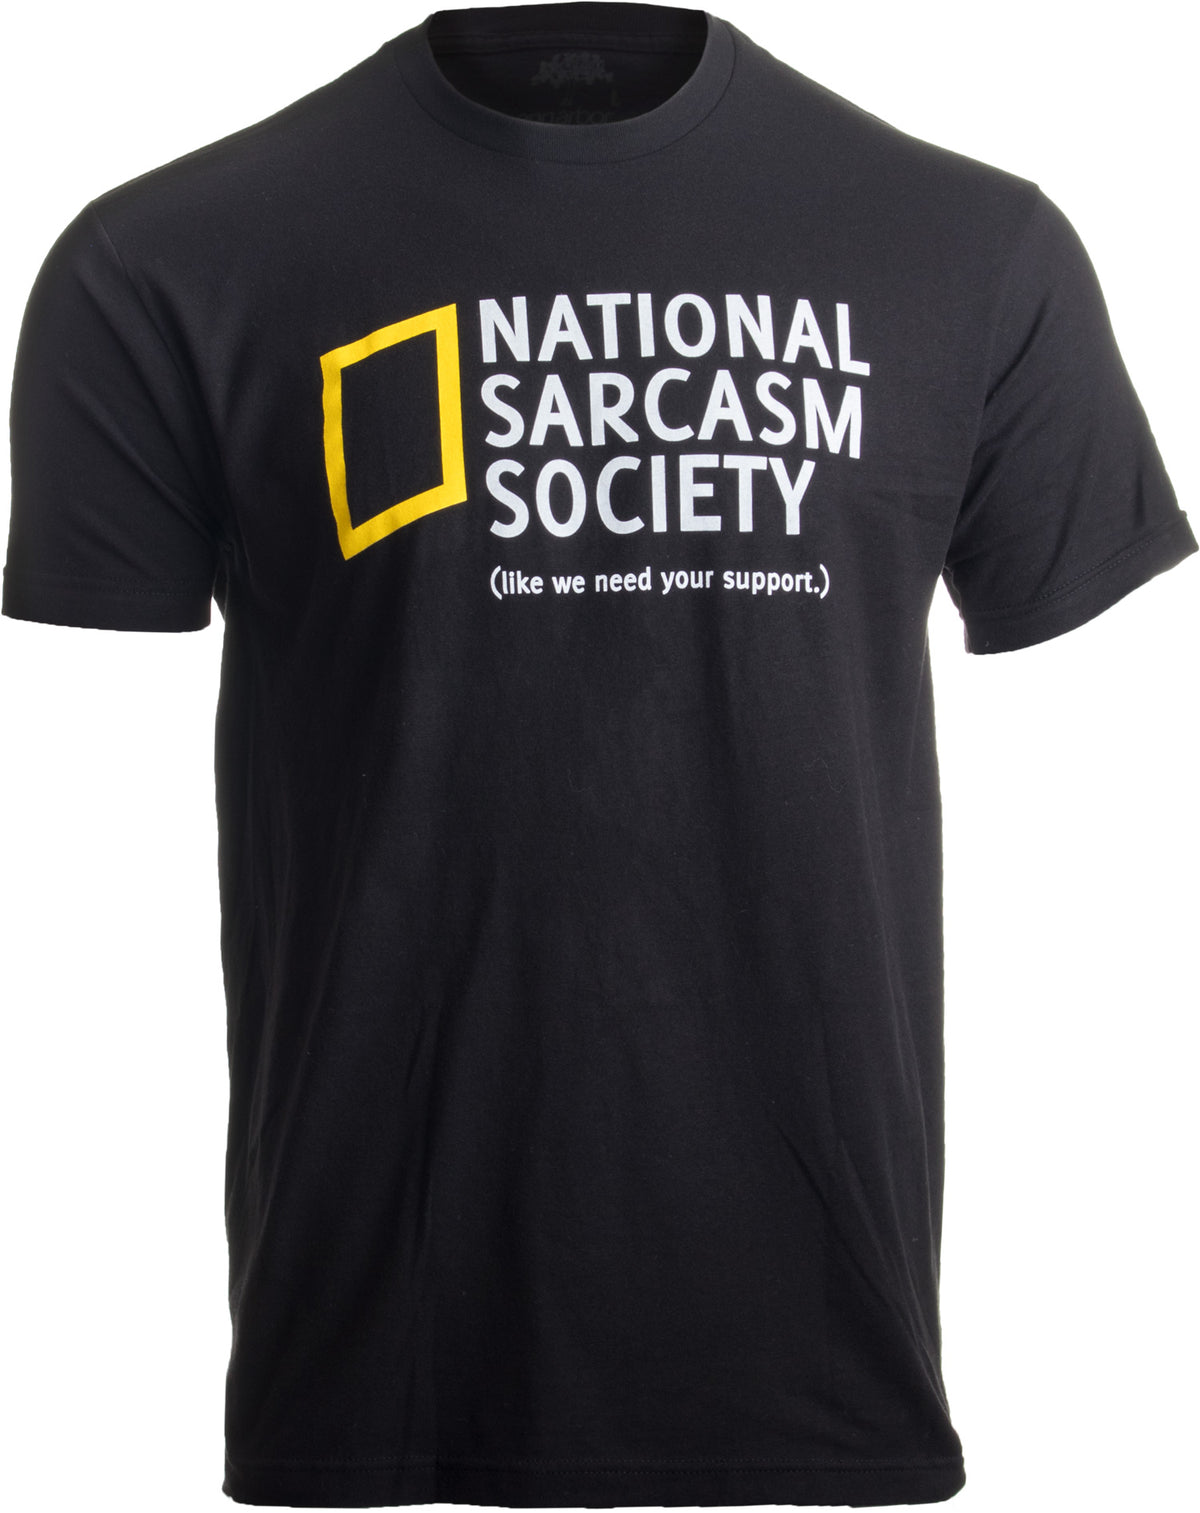 National Sarcasm Society (like we need your support) | Funny Sarcastic T-shirt